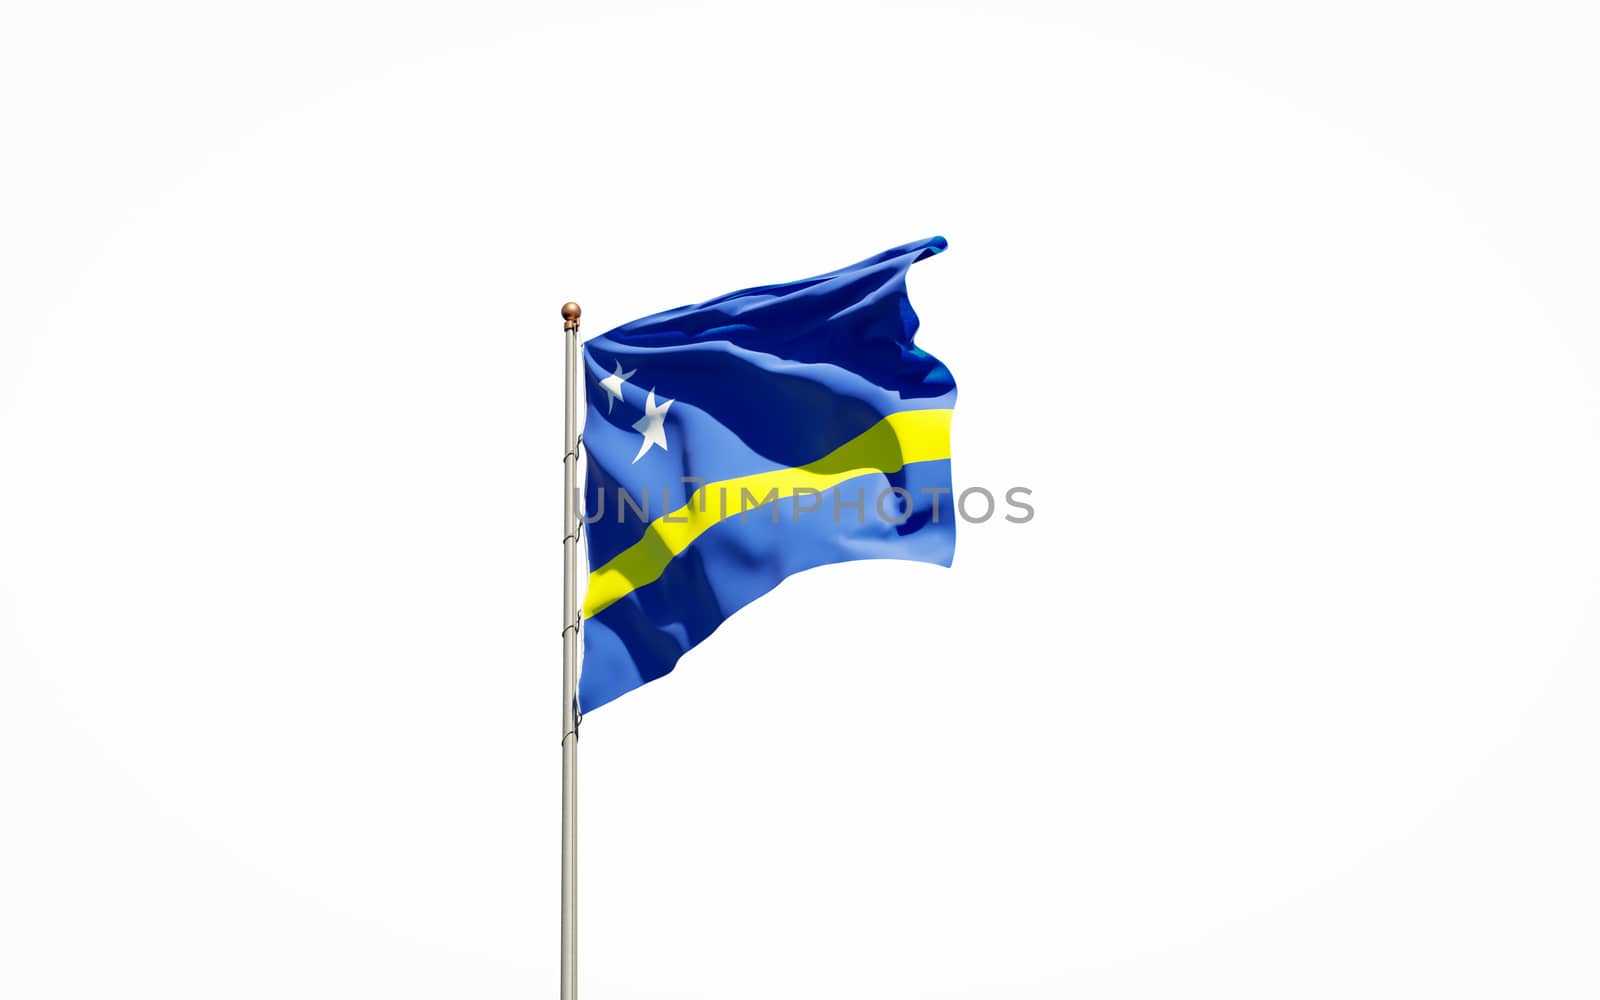 Beautiful national state flag of Curacao on white background. Isolated close-up Curacao flag 3D artwork.